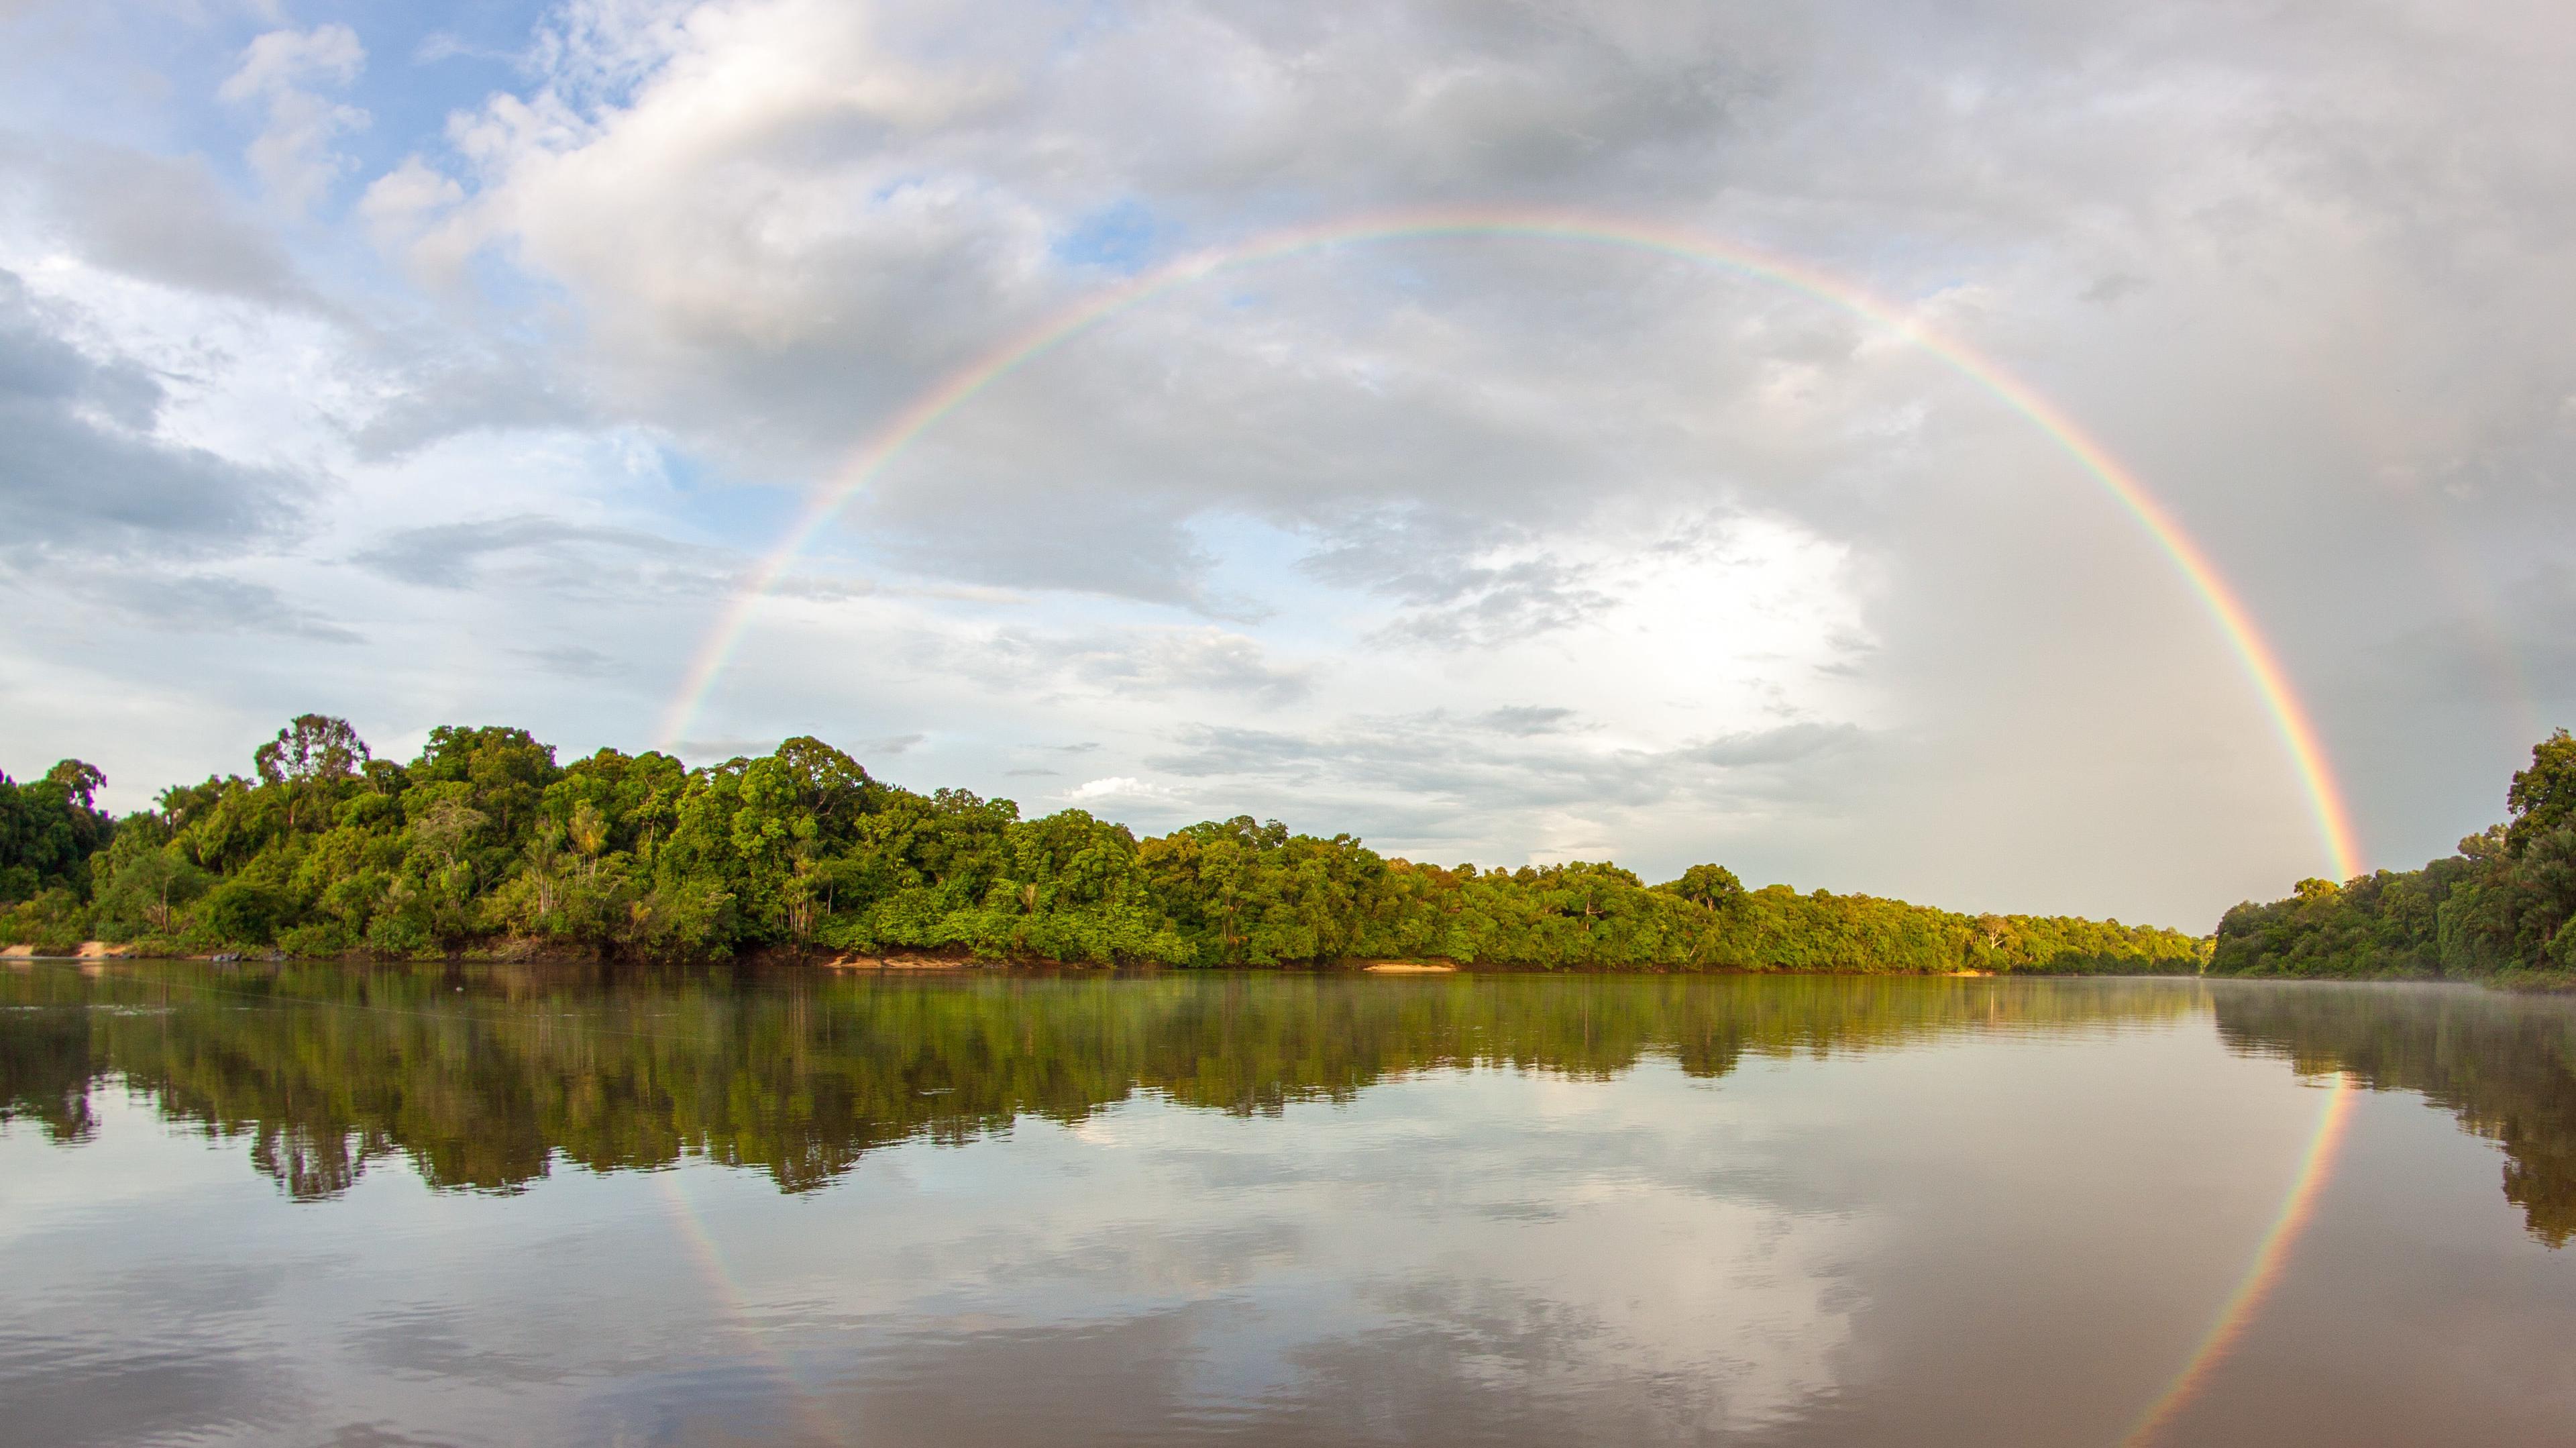 The Essequibo River, Guyana